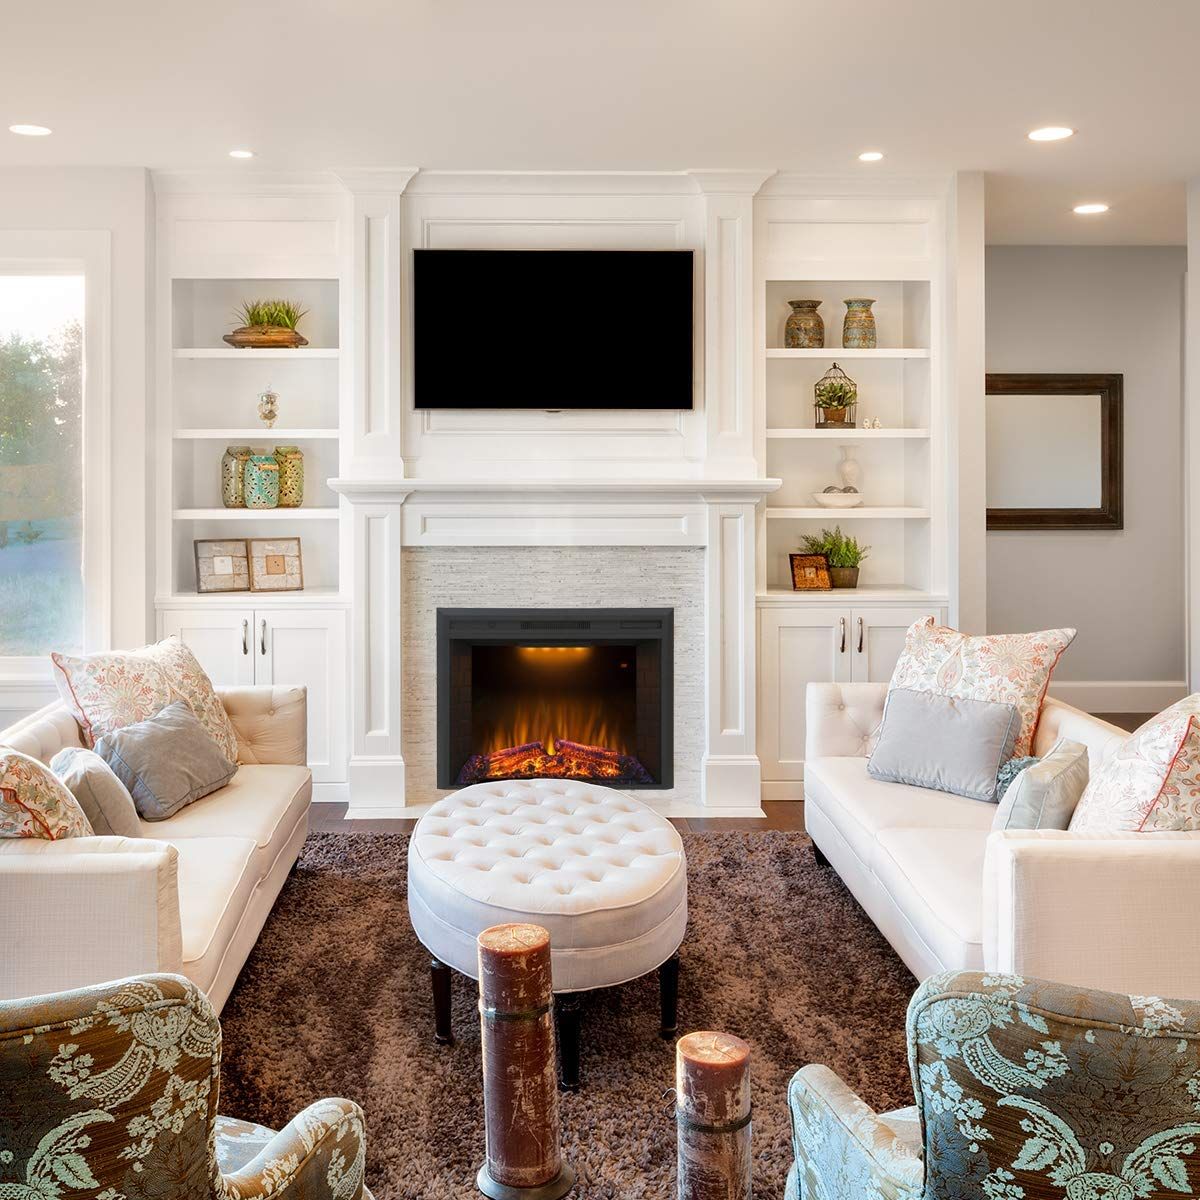 5 Small Living Room Staging Ideas To Help You Sell Your Home Fast